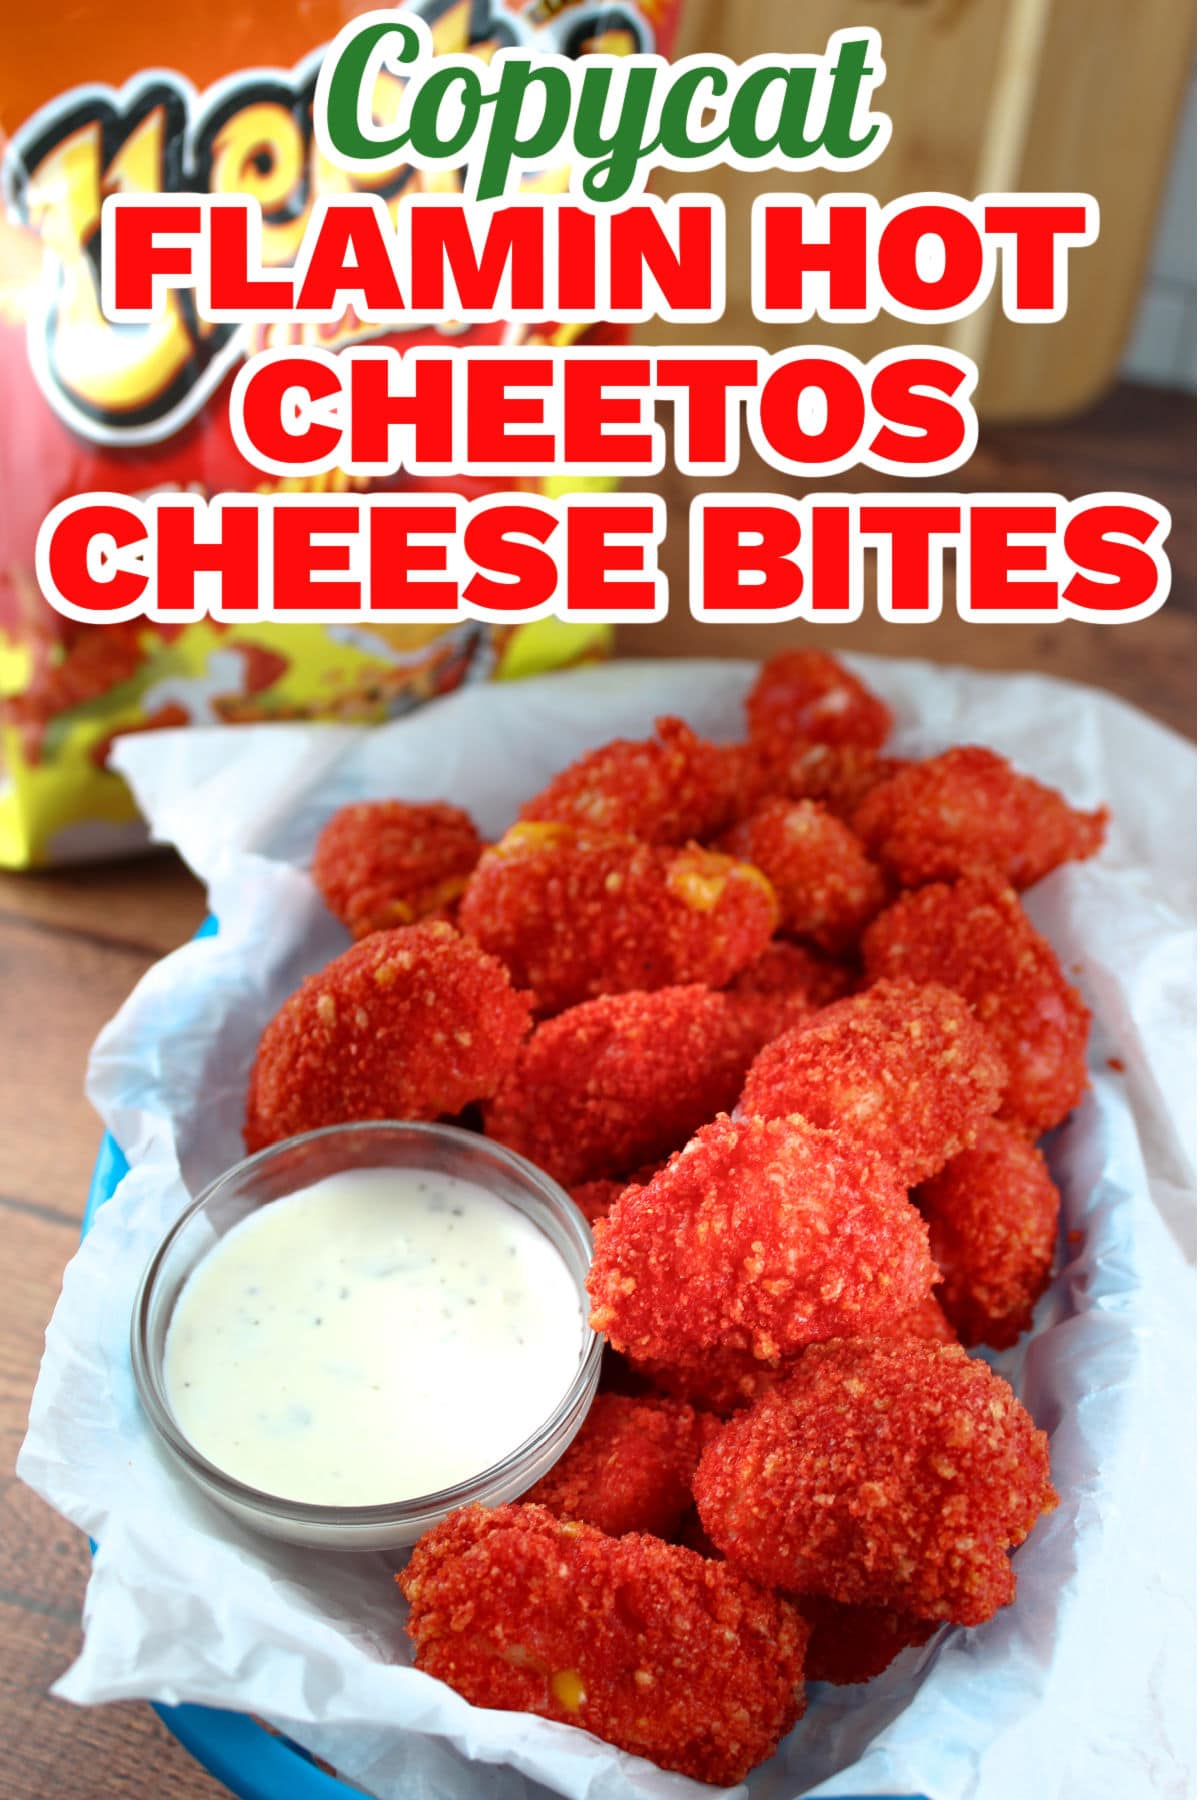 This Copycat Applebees Flamin' Hot Cheetos Cheese Bites recipe puts a twist on the deep fried finger food. They're crunchy, spicy hot and soooo cheesy! But no need to find your nearest Applebees - you can make them at home (in your air fryer)!   via @foodhussy